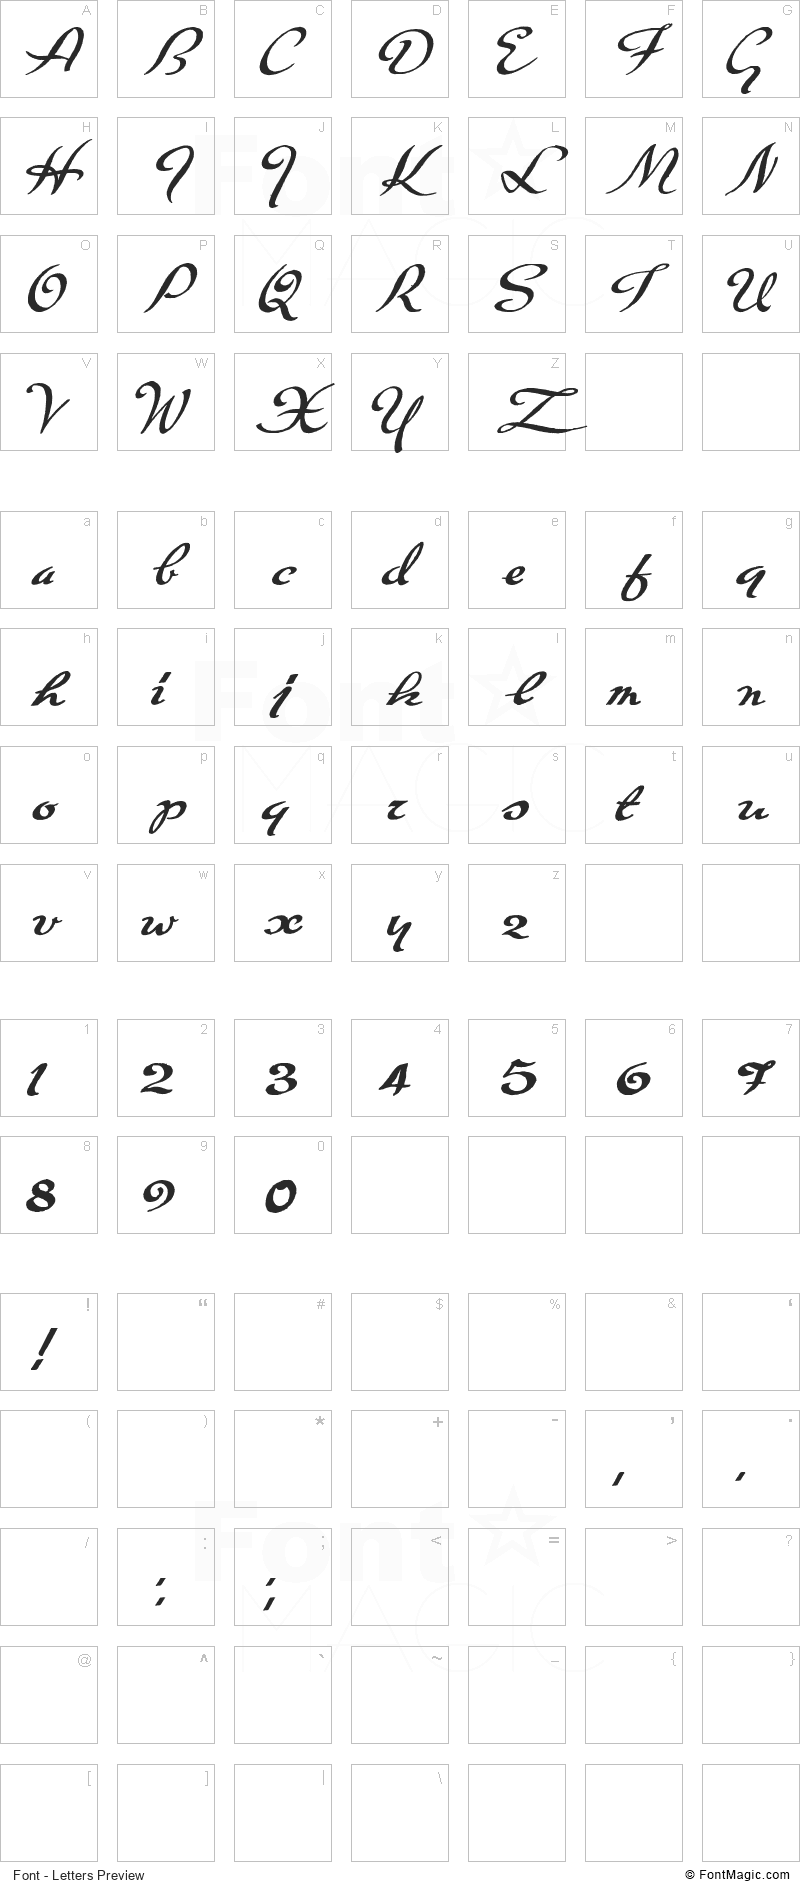 Carpete Font - All Latters Preview Chart